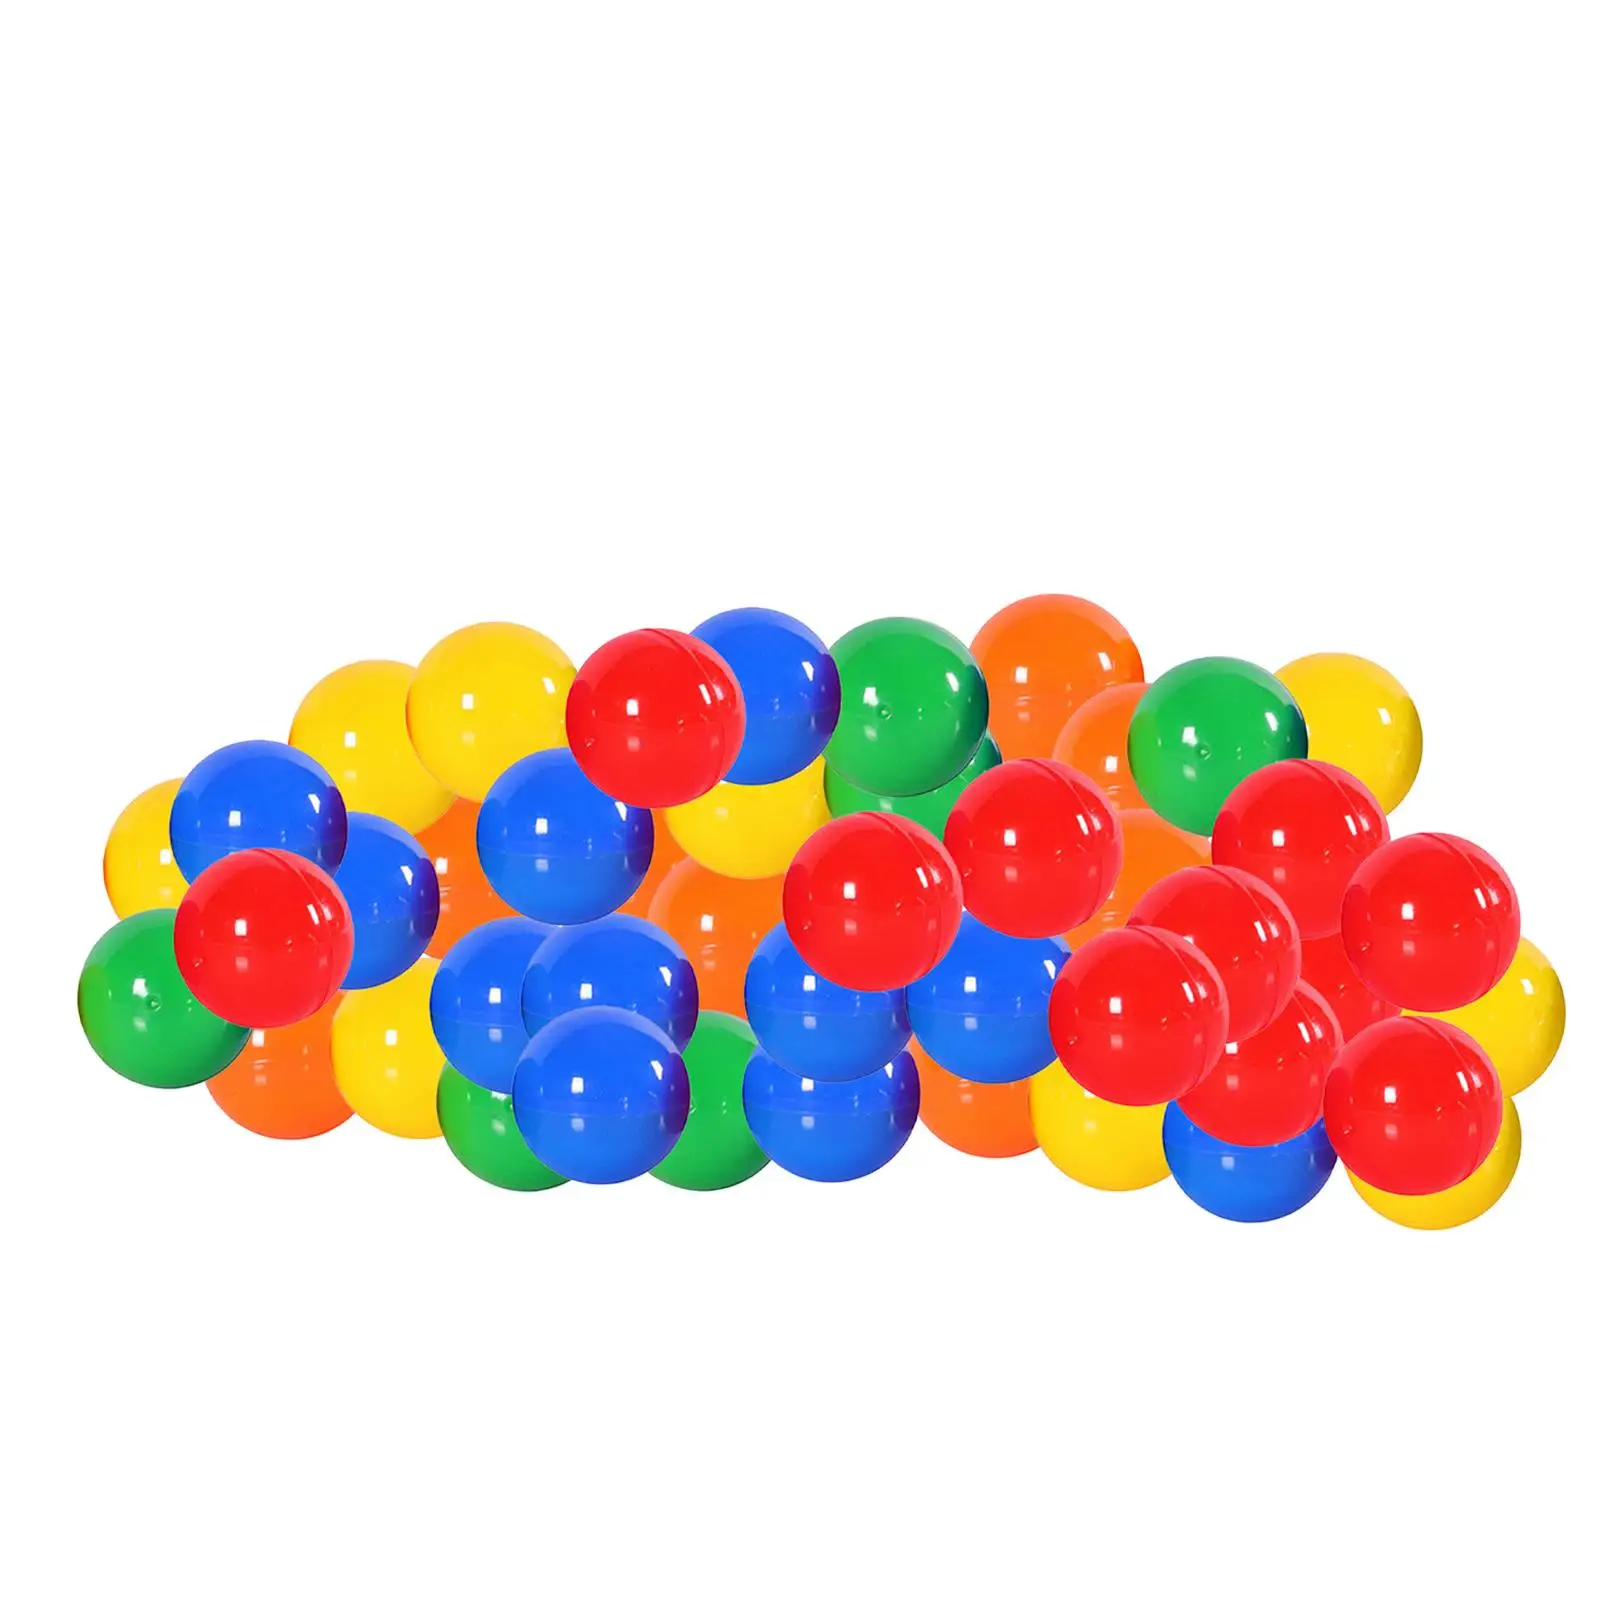 50 Pieces Bingo Ball Accessories Replacement Parts Raffle Balls Calling Balls for Company Nights Parties Household Family